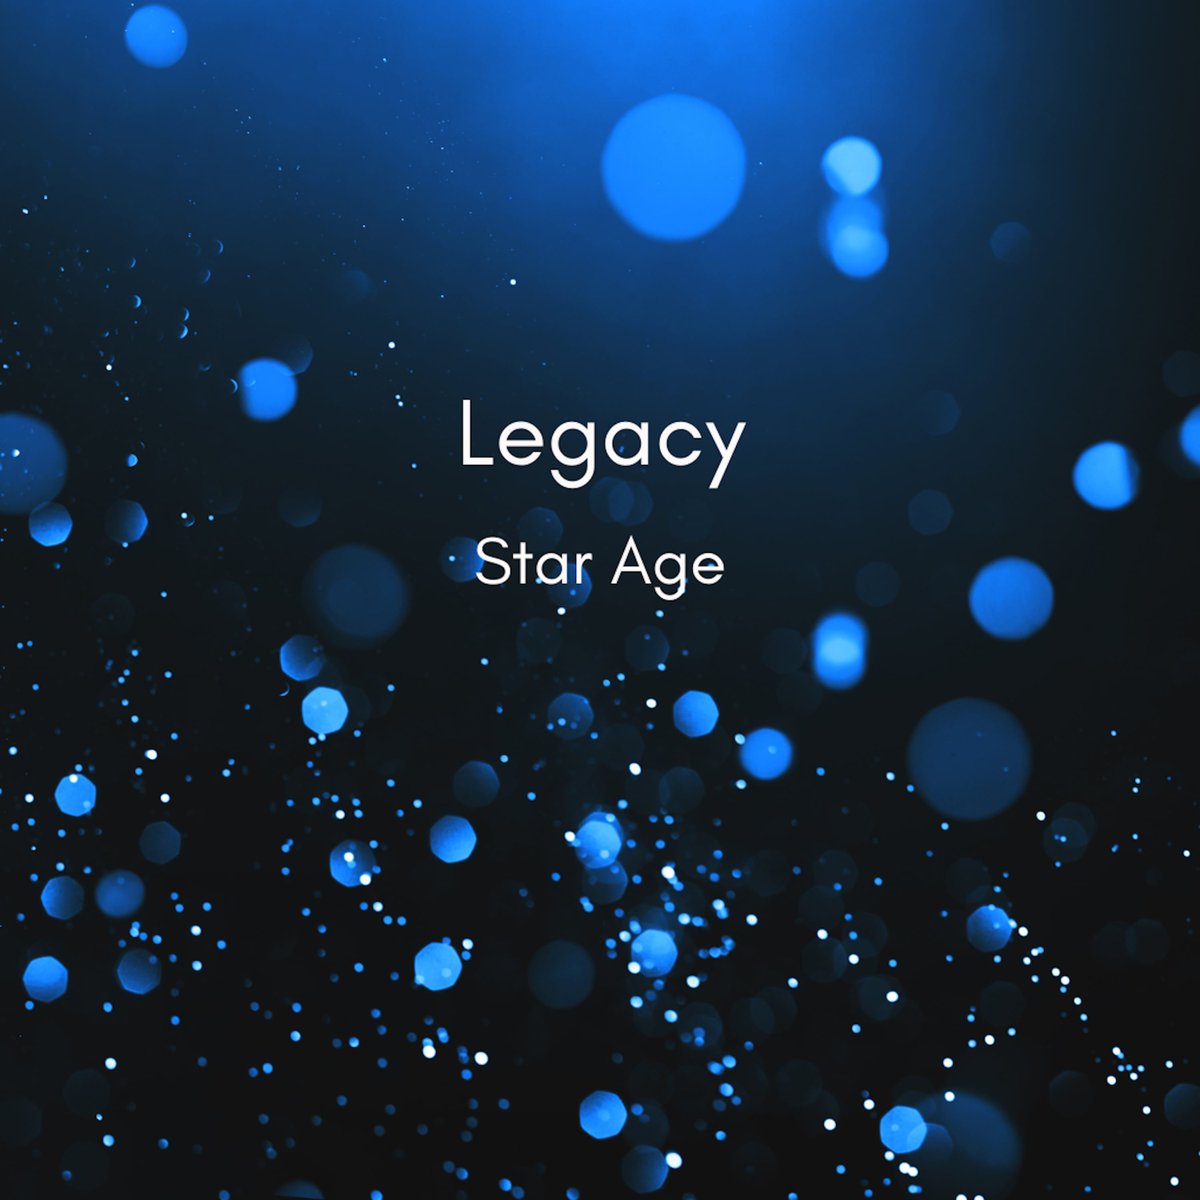 Pandora lovers, you can now listen to 'Legacy' here: pandora.app.link/Uxi6blZboAb Give me a thumbs up if you like this calm, yet uplifting homage to my late Mom on her 87th bday wk. #pandora #pandoramusic #amppandora @pandoraAMP #neoclassicalmusic #modernclassical #music